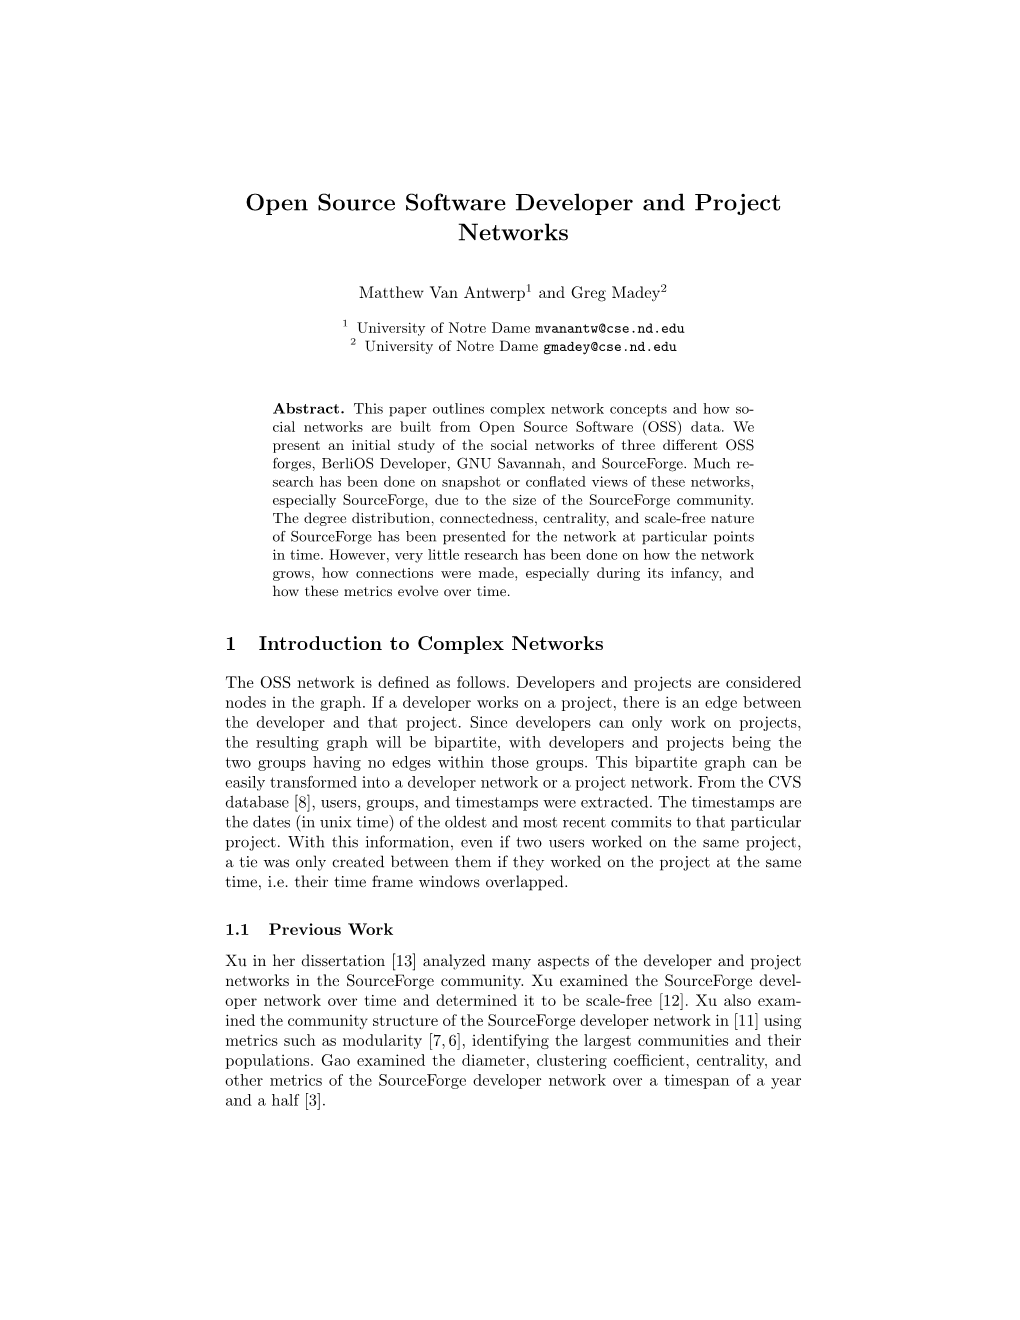 Open Source Software Developer and Project Networks